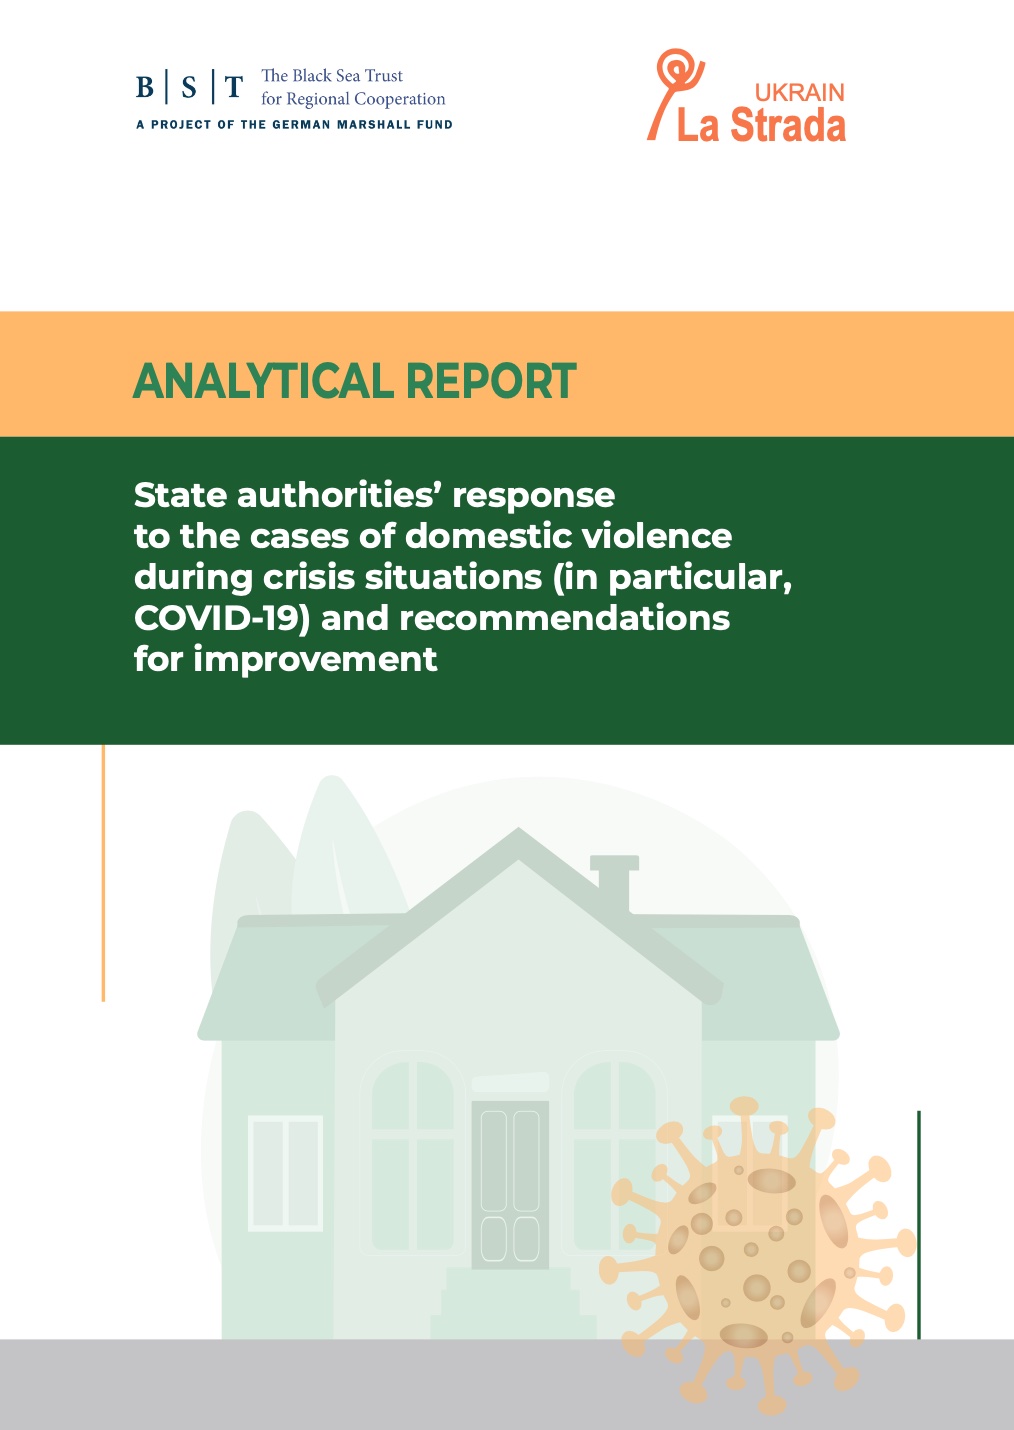 Analytical report "State authorities’ response to the cases of domestic violence during crisis situations (in particular, COVID-19) and recommendations for improvement"